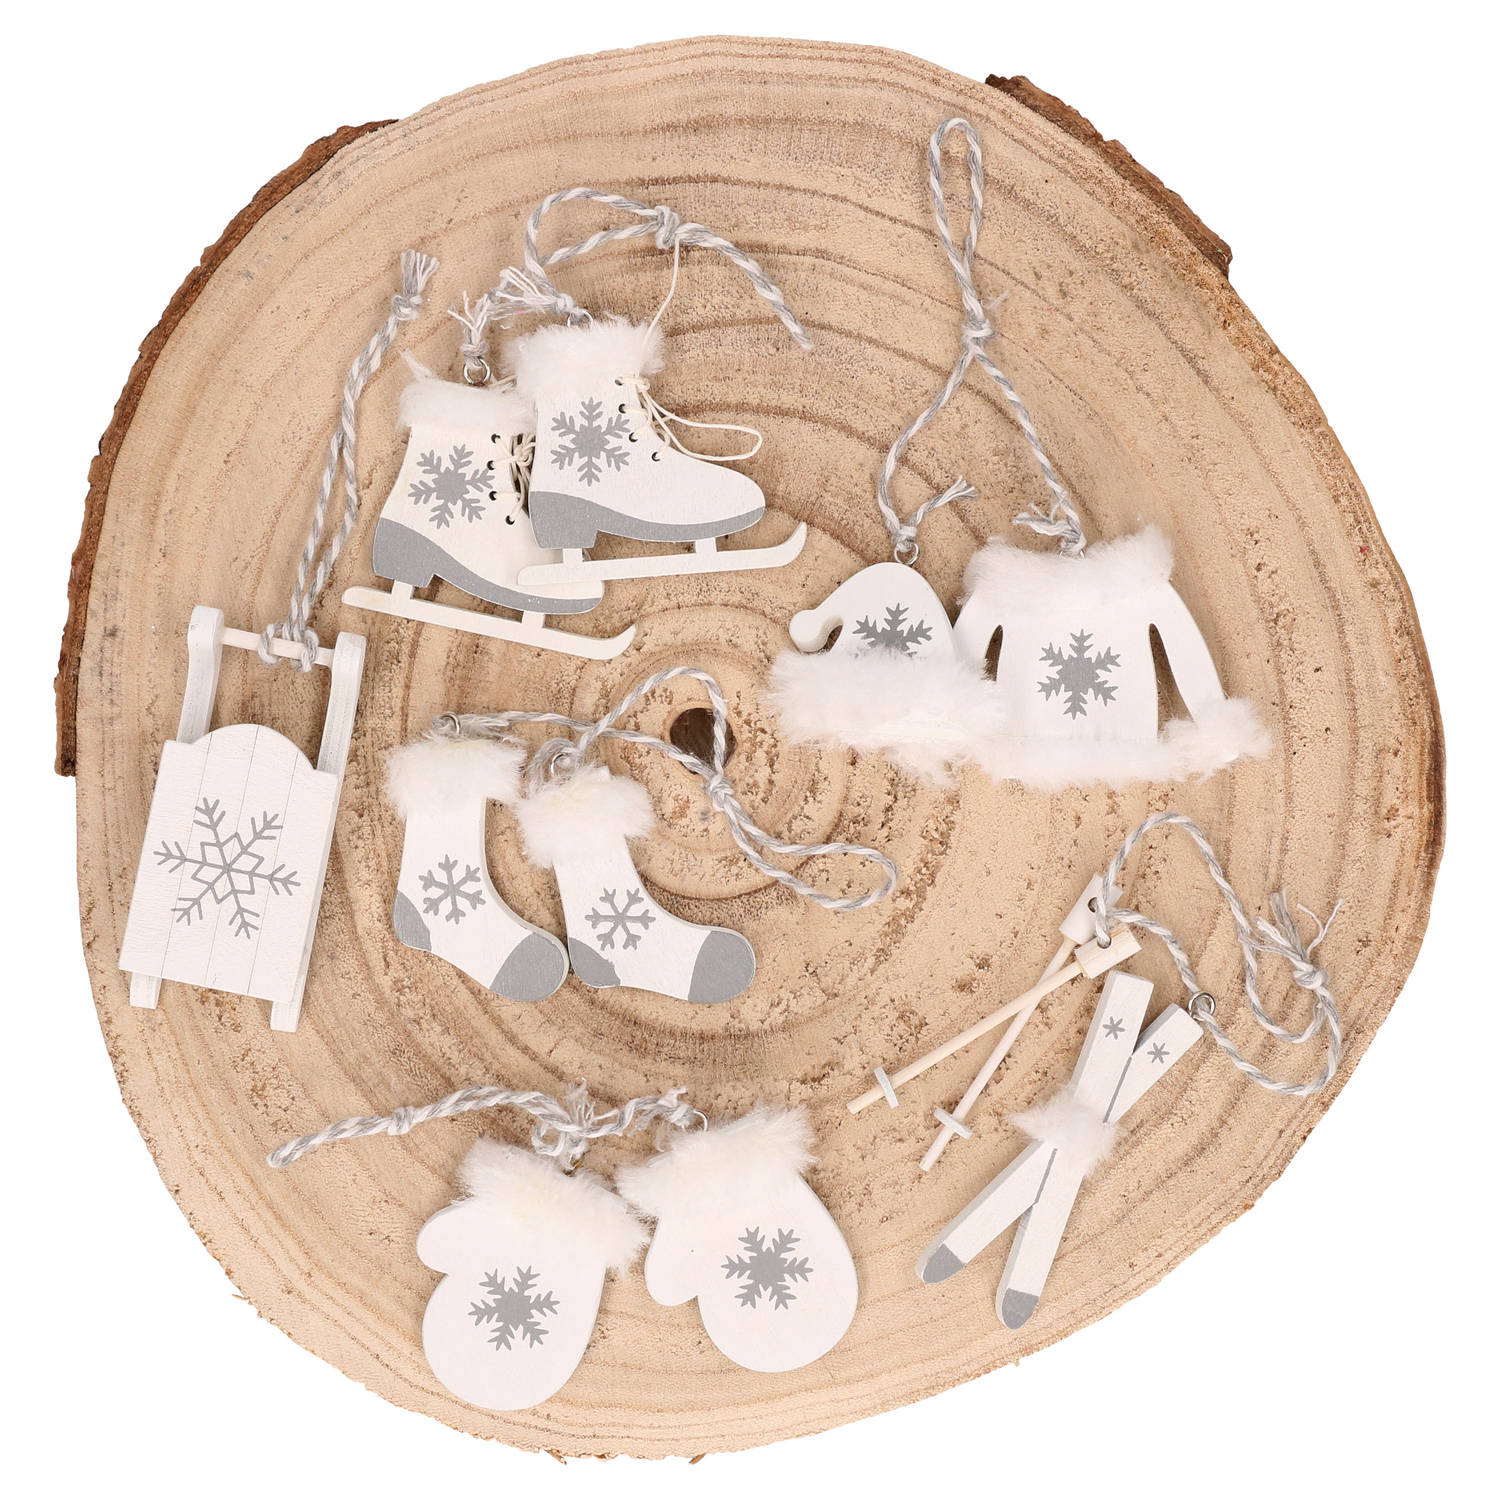 Othmar Decorations kersthangers wintersport -6x st -wit -hout -8 cm